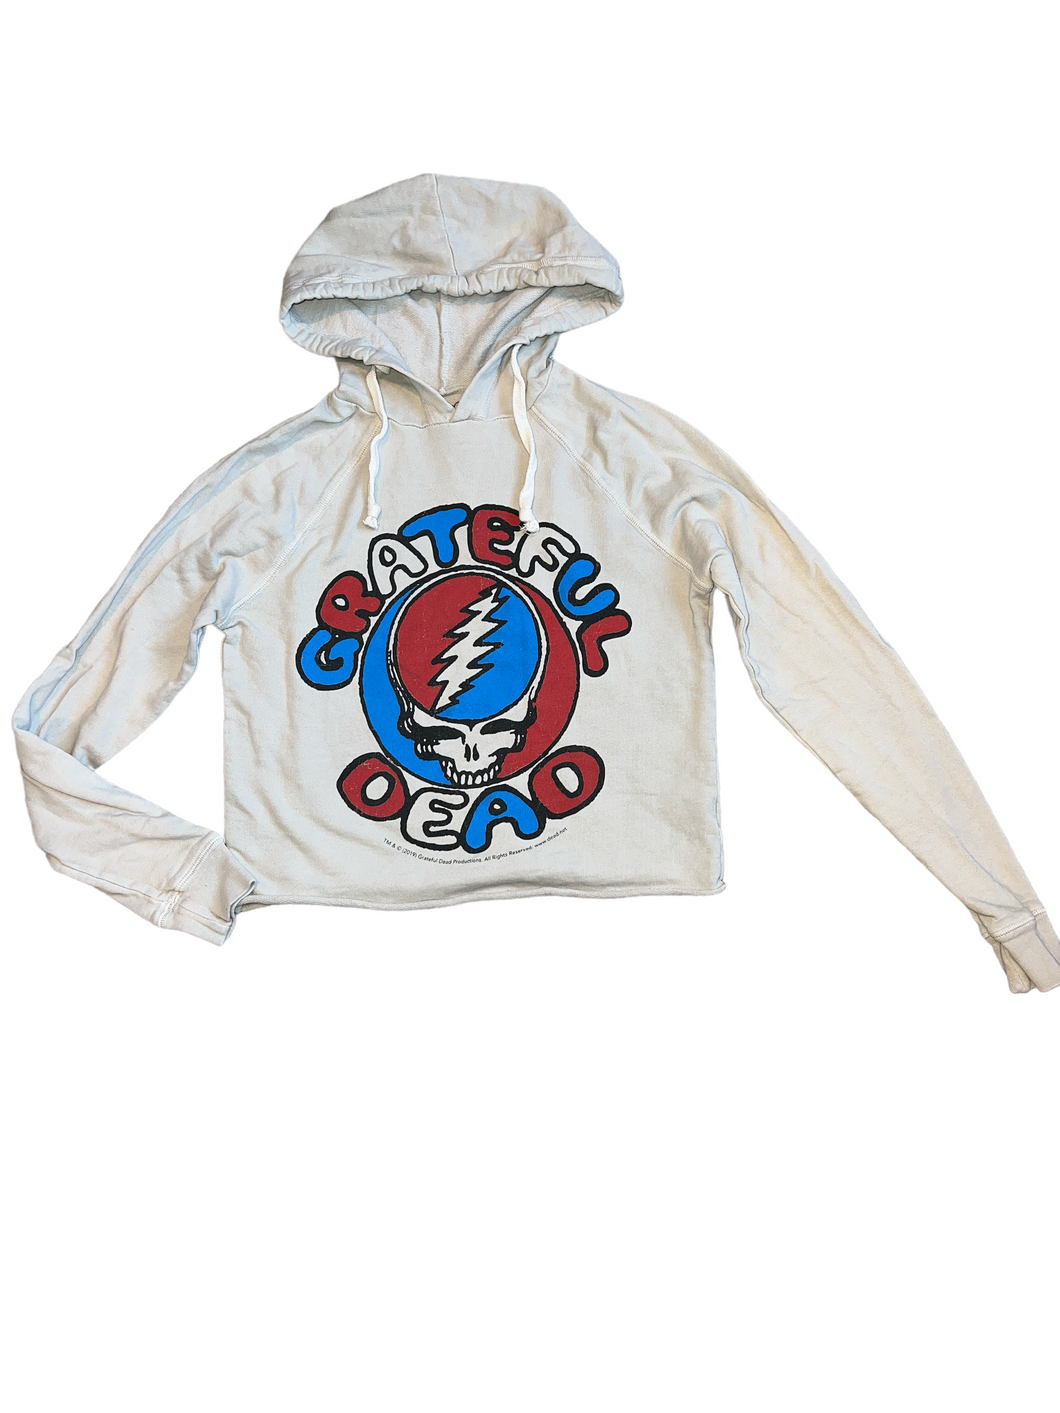 Retro Brand girls cropped Grateful Dead hoodie top youth M